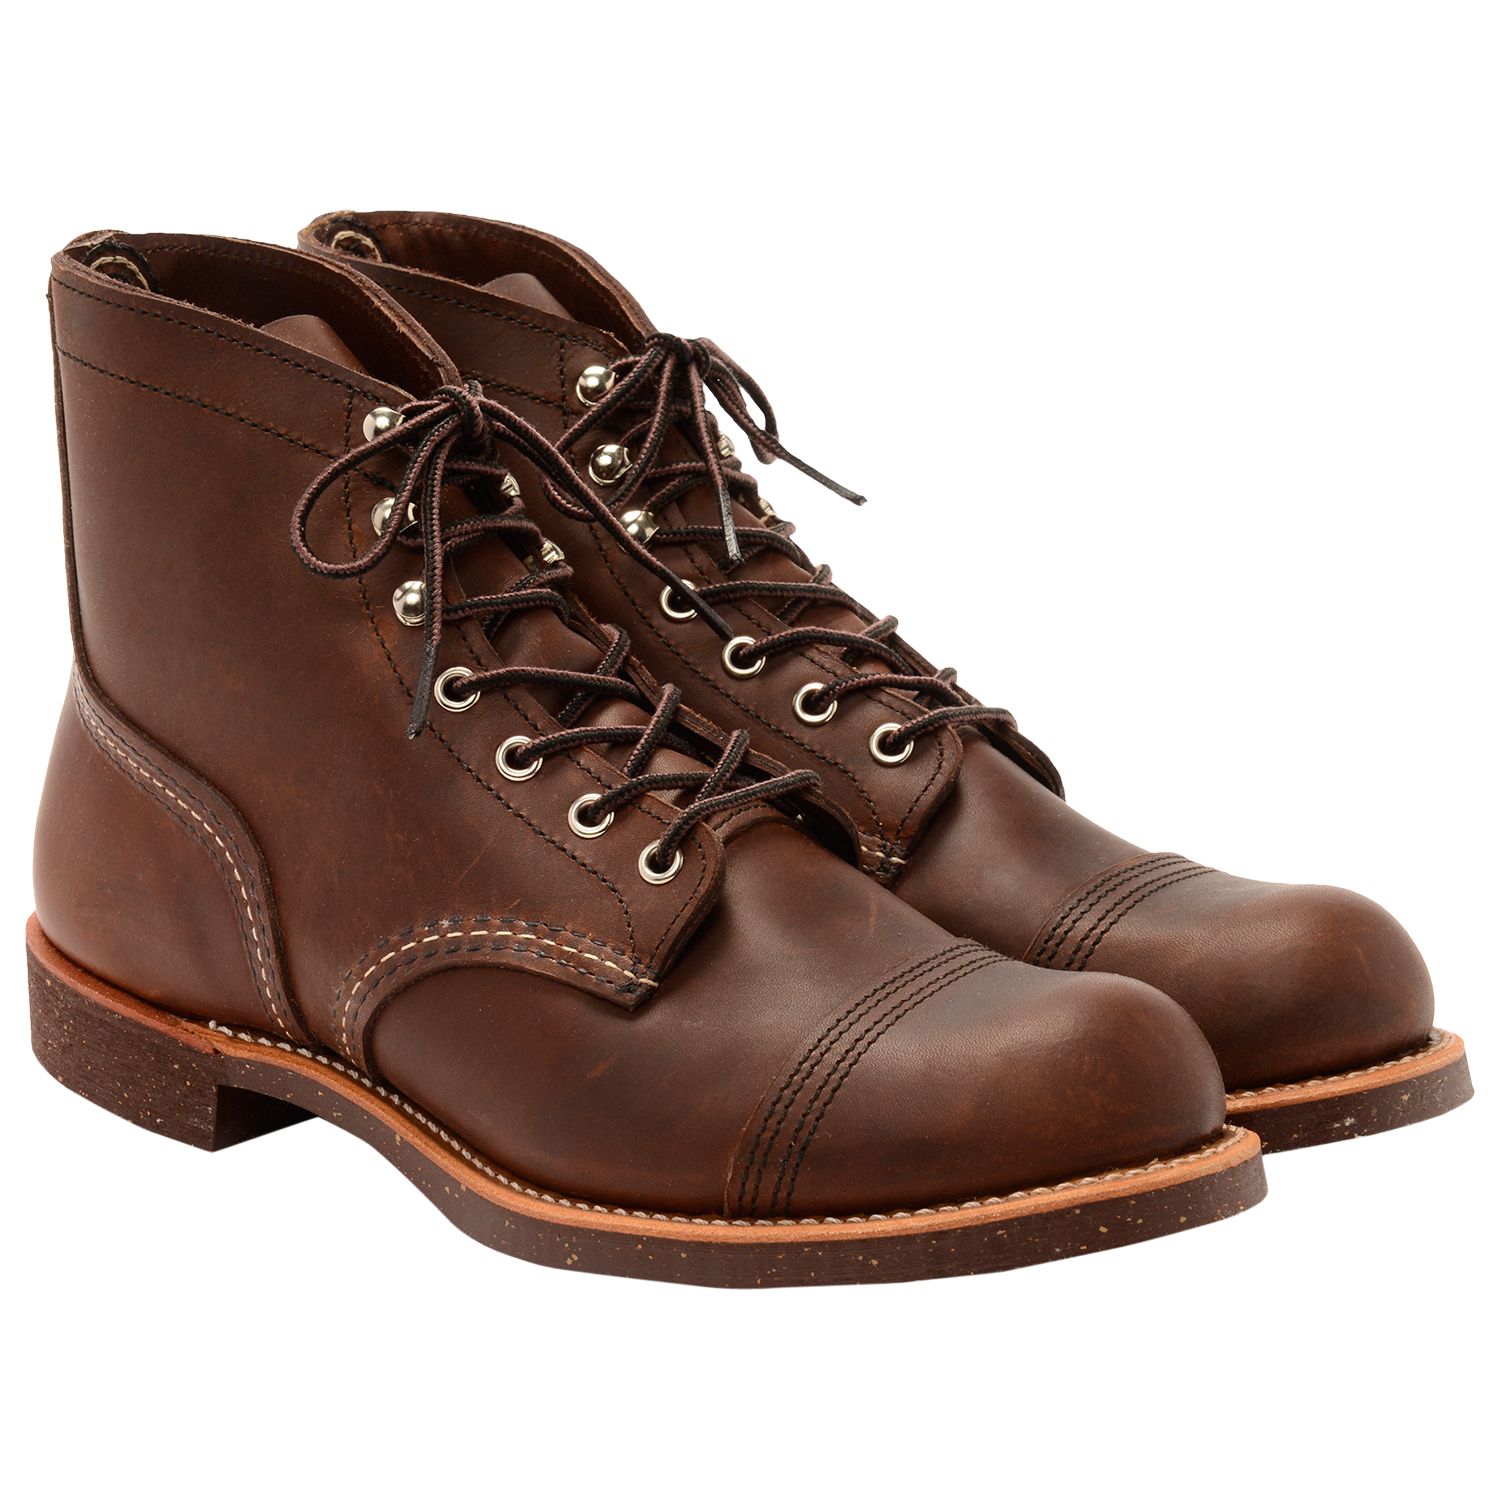 Buy Red Wing 8111 Iron Ranger Boots, Amber Harness Online at johnlewis.com